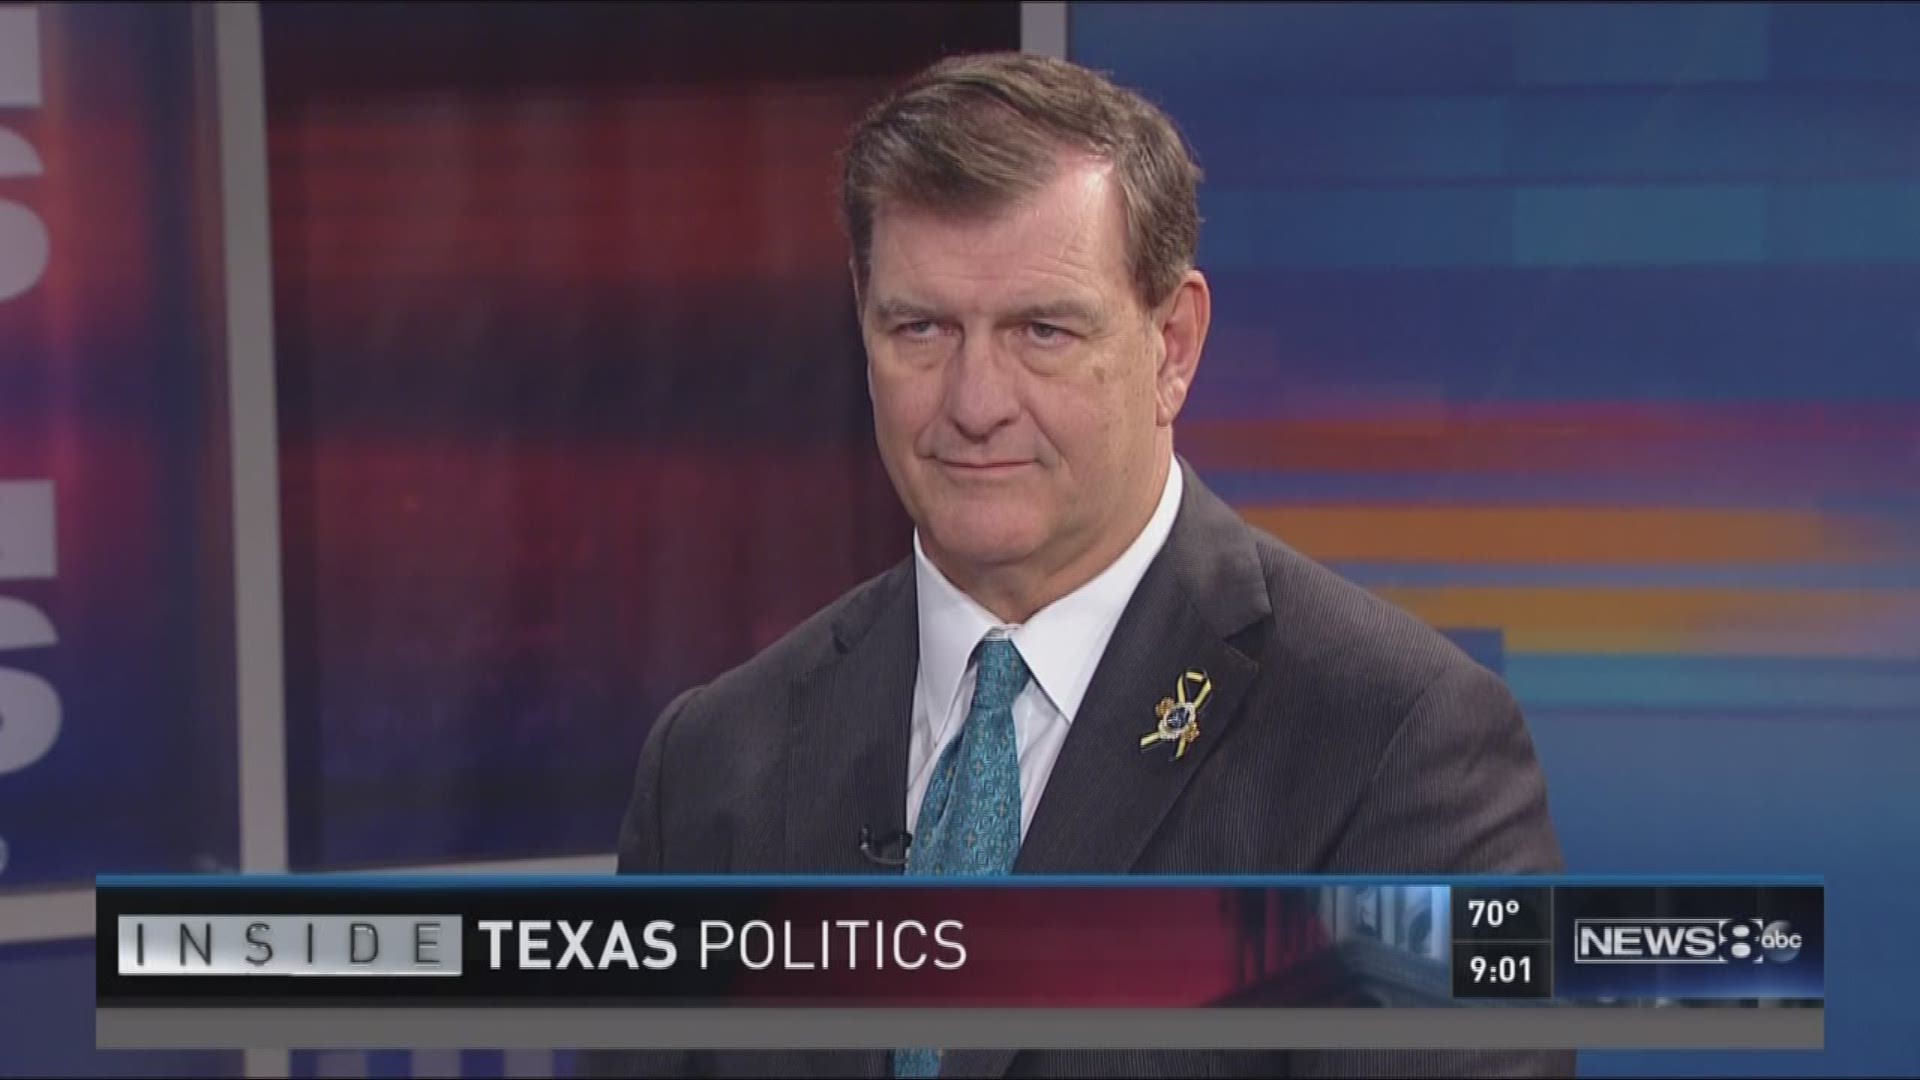 Inside Texas Politics began with Dallas Mayor Mike Rawlings and the National Rifle Association convention under way in downtown Dallas. Mayor Rawlings explains why leaders on both sides of the gun control issue wouldn't accept his offer to have a substant